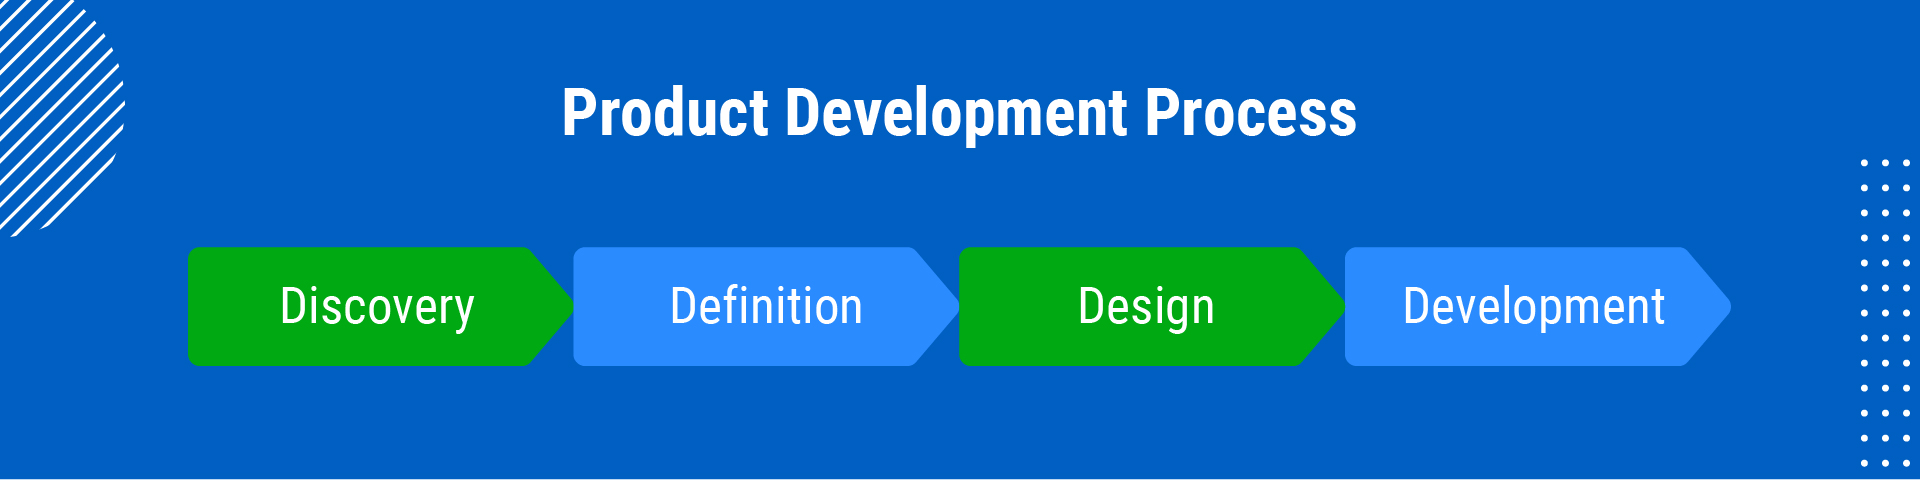 traditional product development model